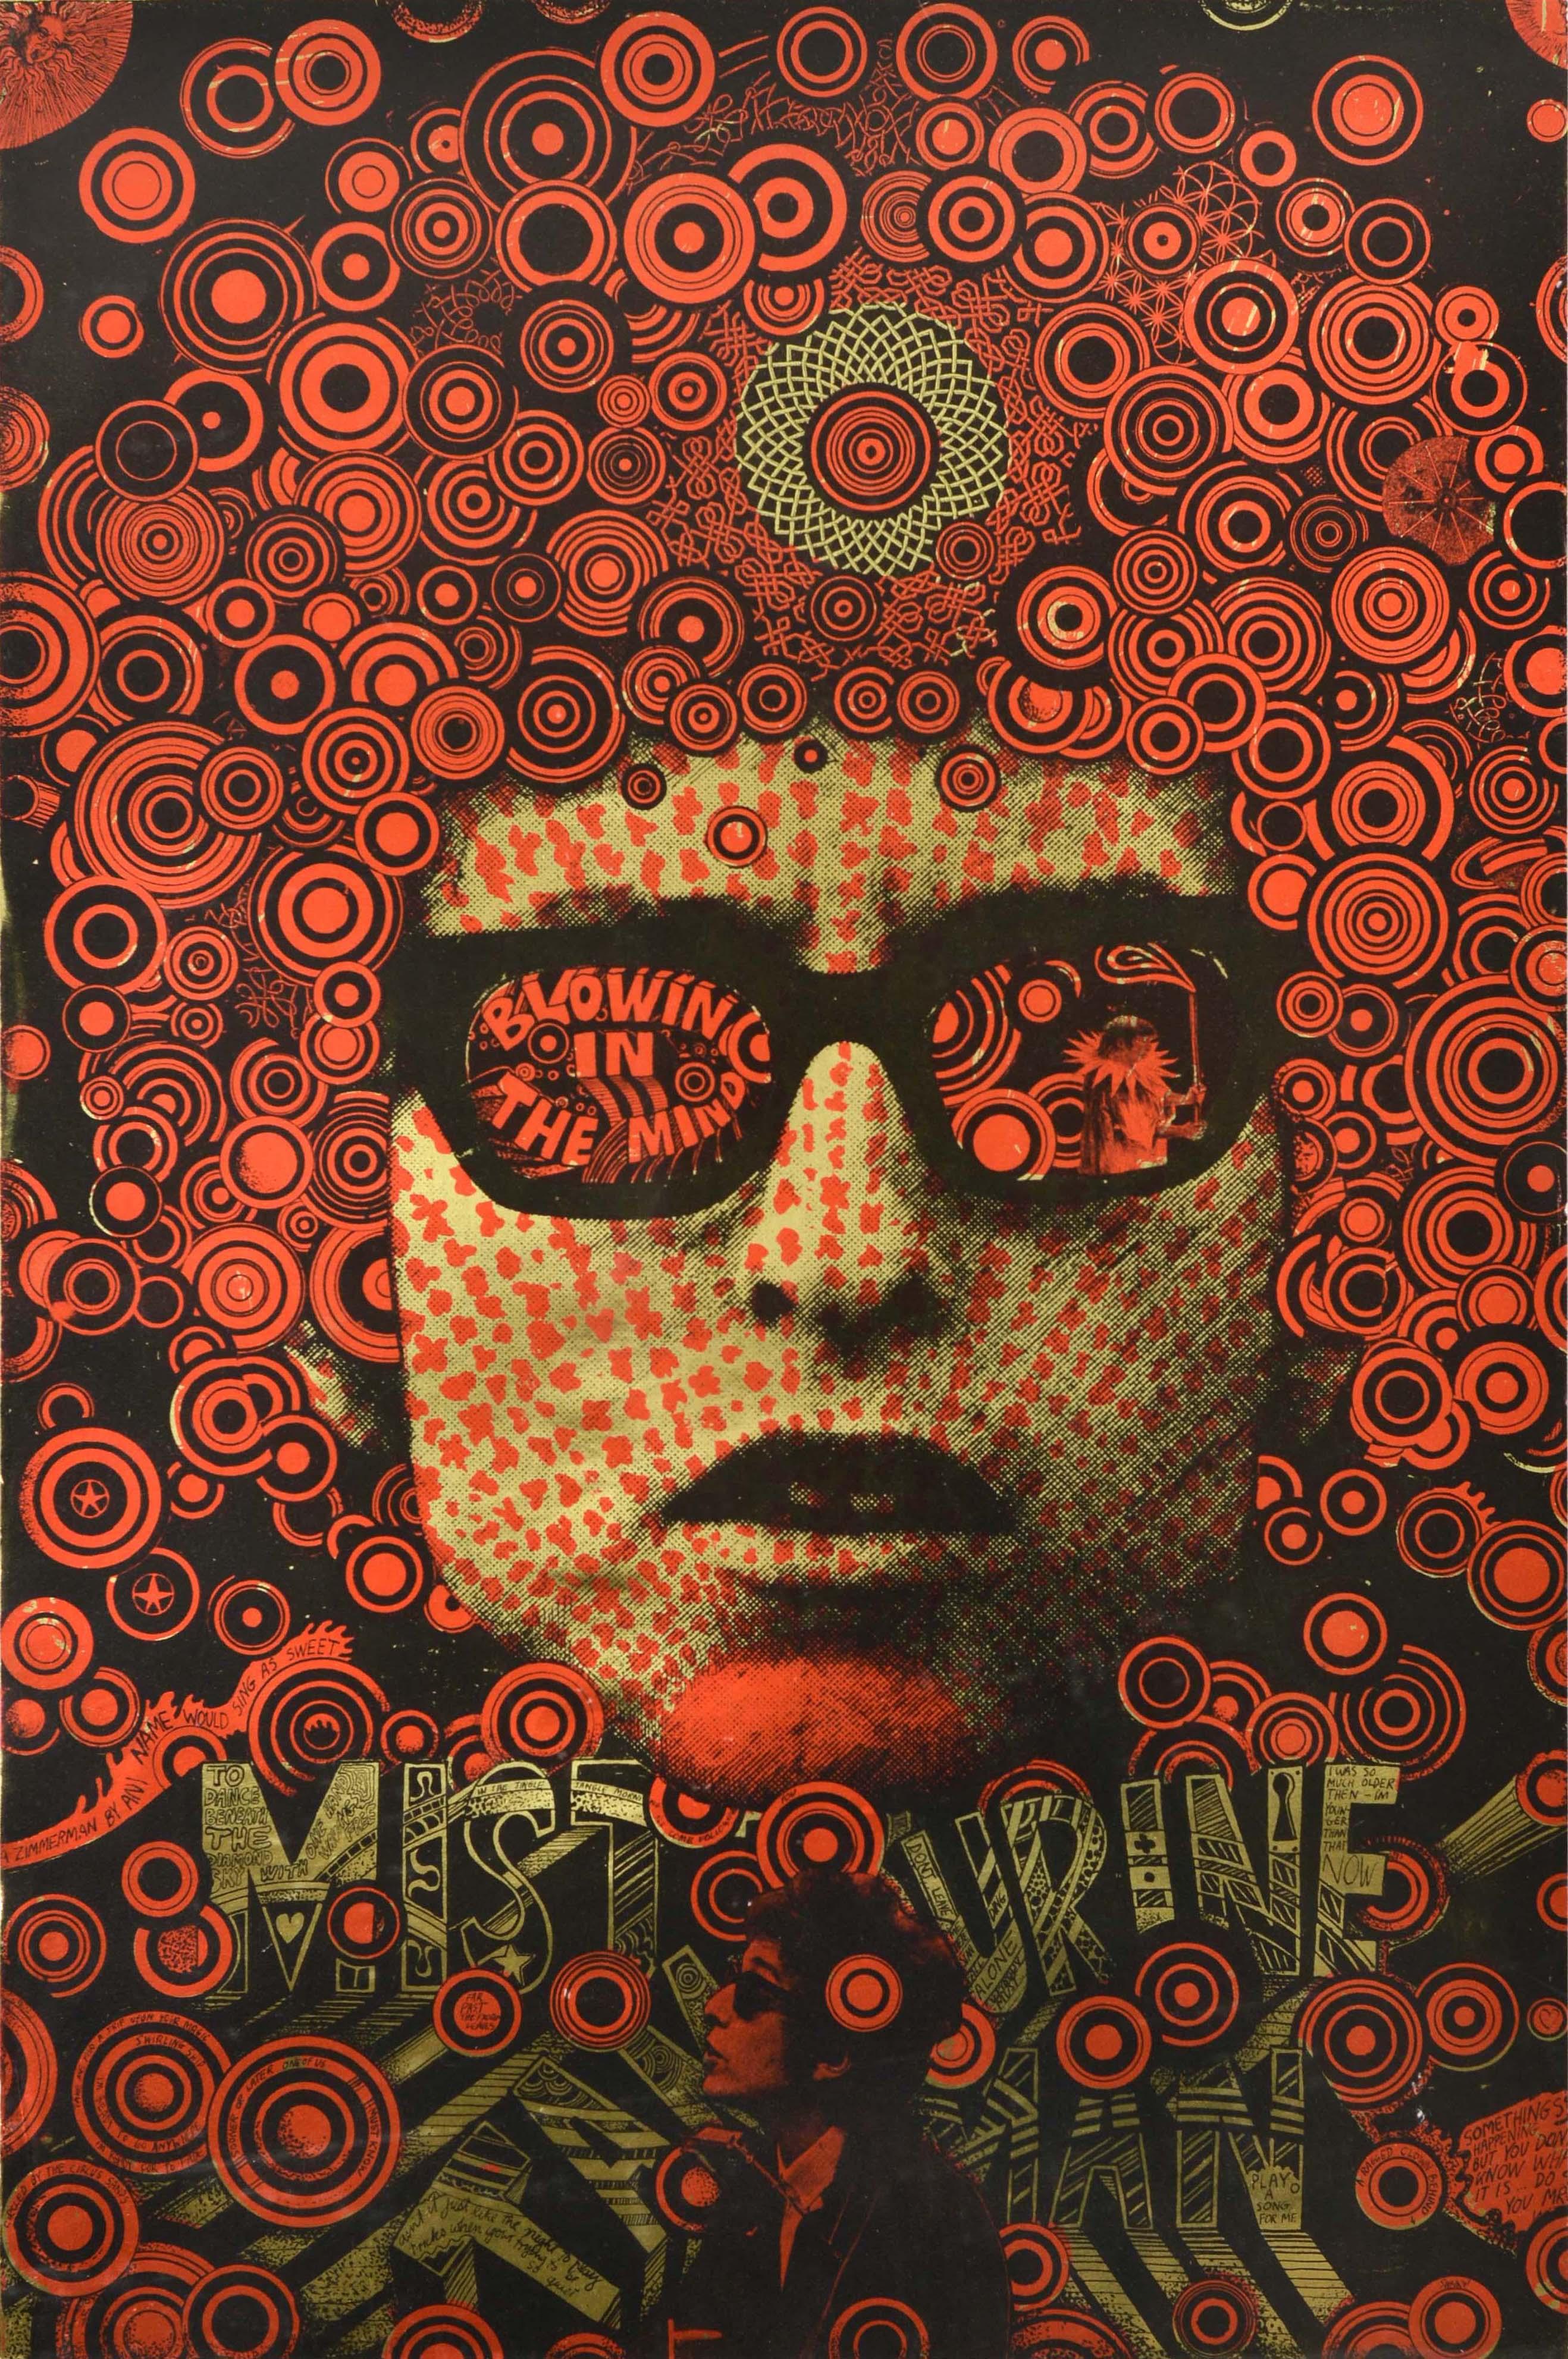 Original vintage music promotional poster for Bob Dylan Blowin in the Mind (a play on Dylan's 1962 Blowin' in the Wind song) featuring an iconic psychedelic graphic design by the Australian artist Martin Sharp (1942-2013) capturing the swinging